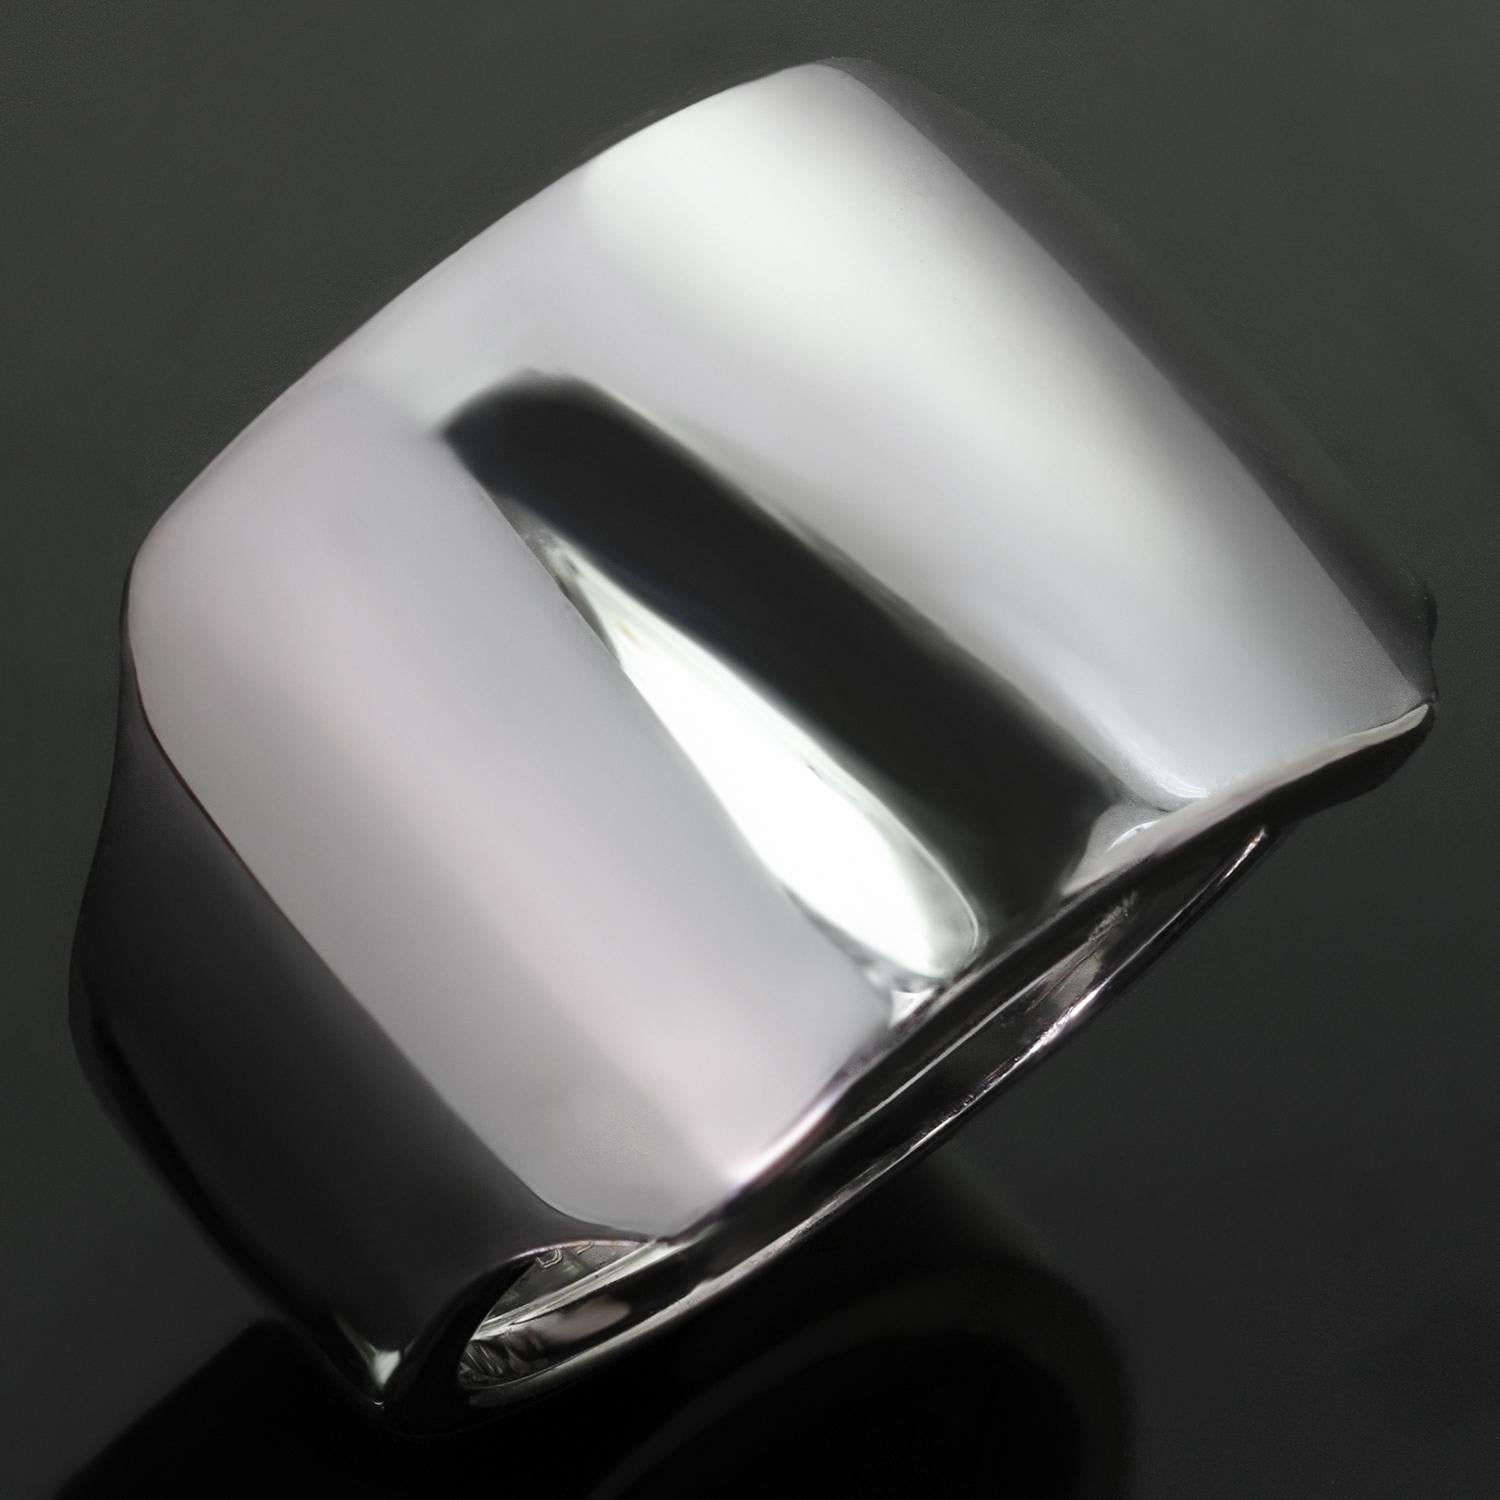 This elegant Cartier ring features a stylishh wide design crafted in 18k white gold. Made in France circa 1990s. Measurements: 0.59